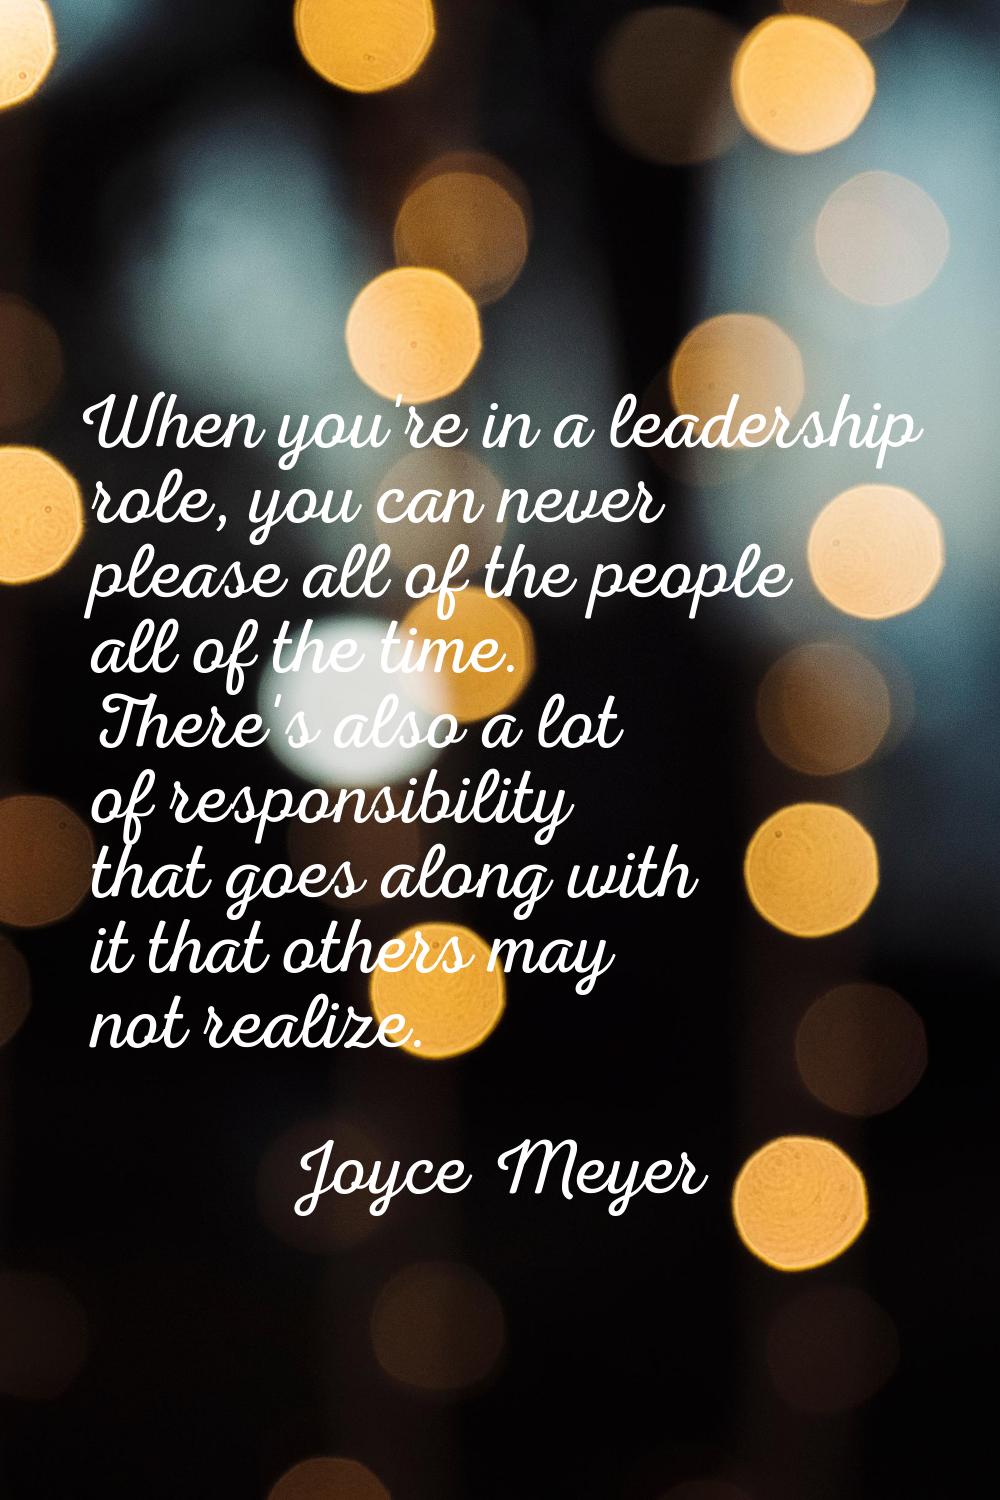 When you're in a leadership role, you can never please all of the people all of the time. There's a